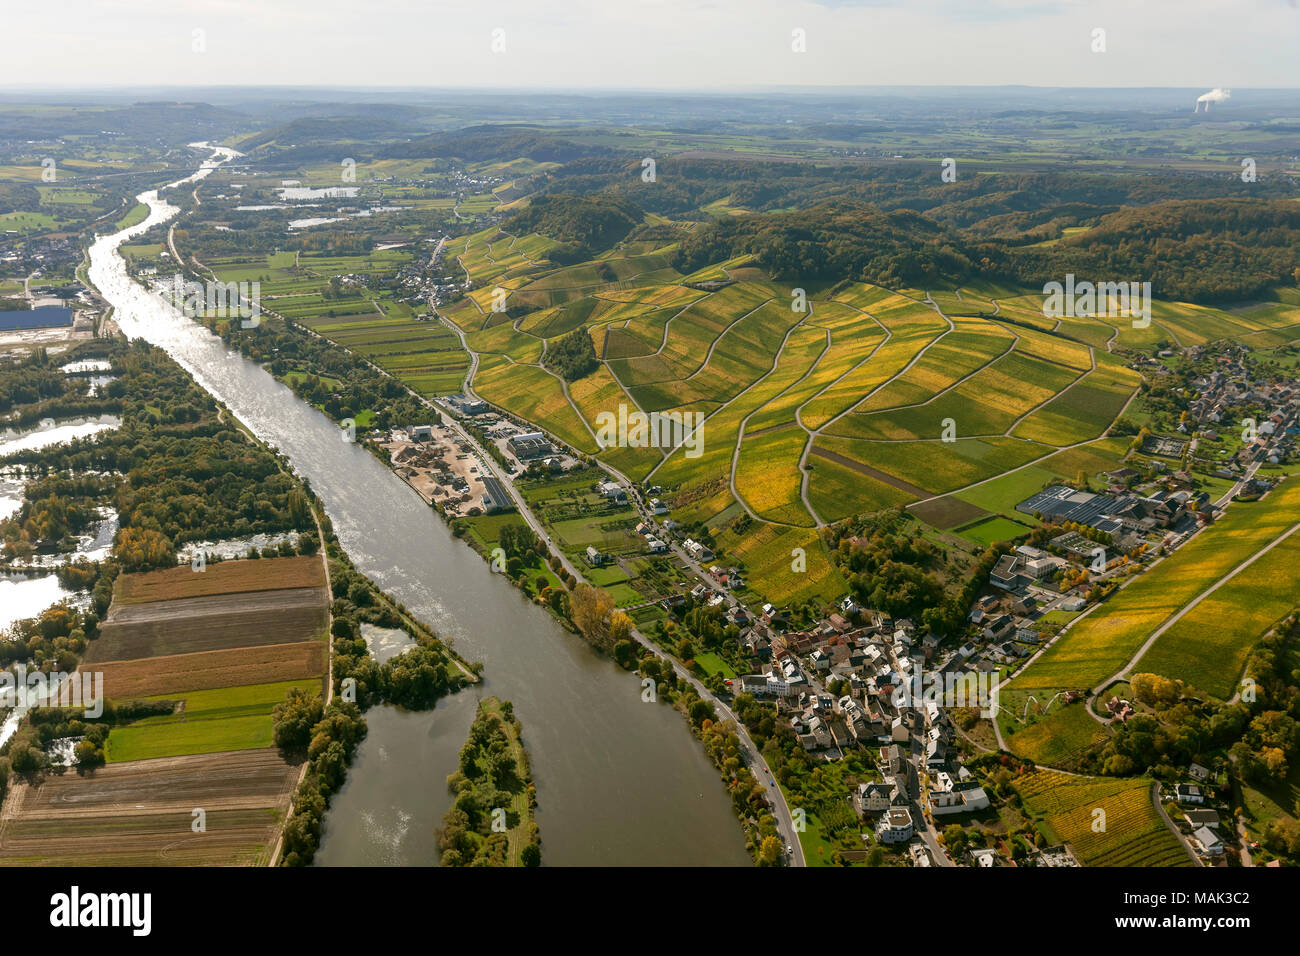 Winegrowing area Moselle Luxembourg, vineyards, Remich, Saarland, Grevenmacher, Luxembourg, Europe, aerial view, birds-eyes view, aerial view, aerial  Stock Photo